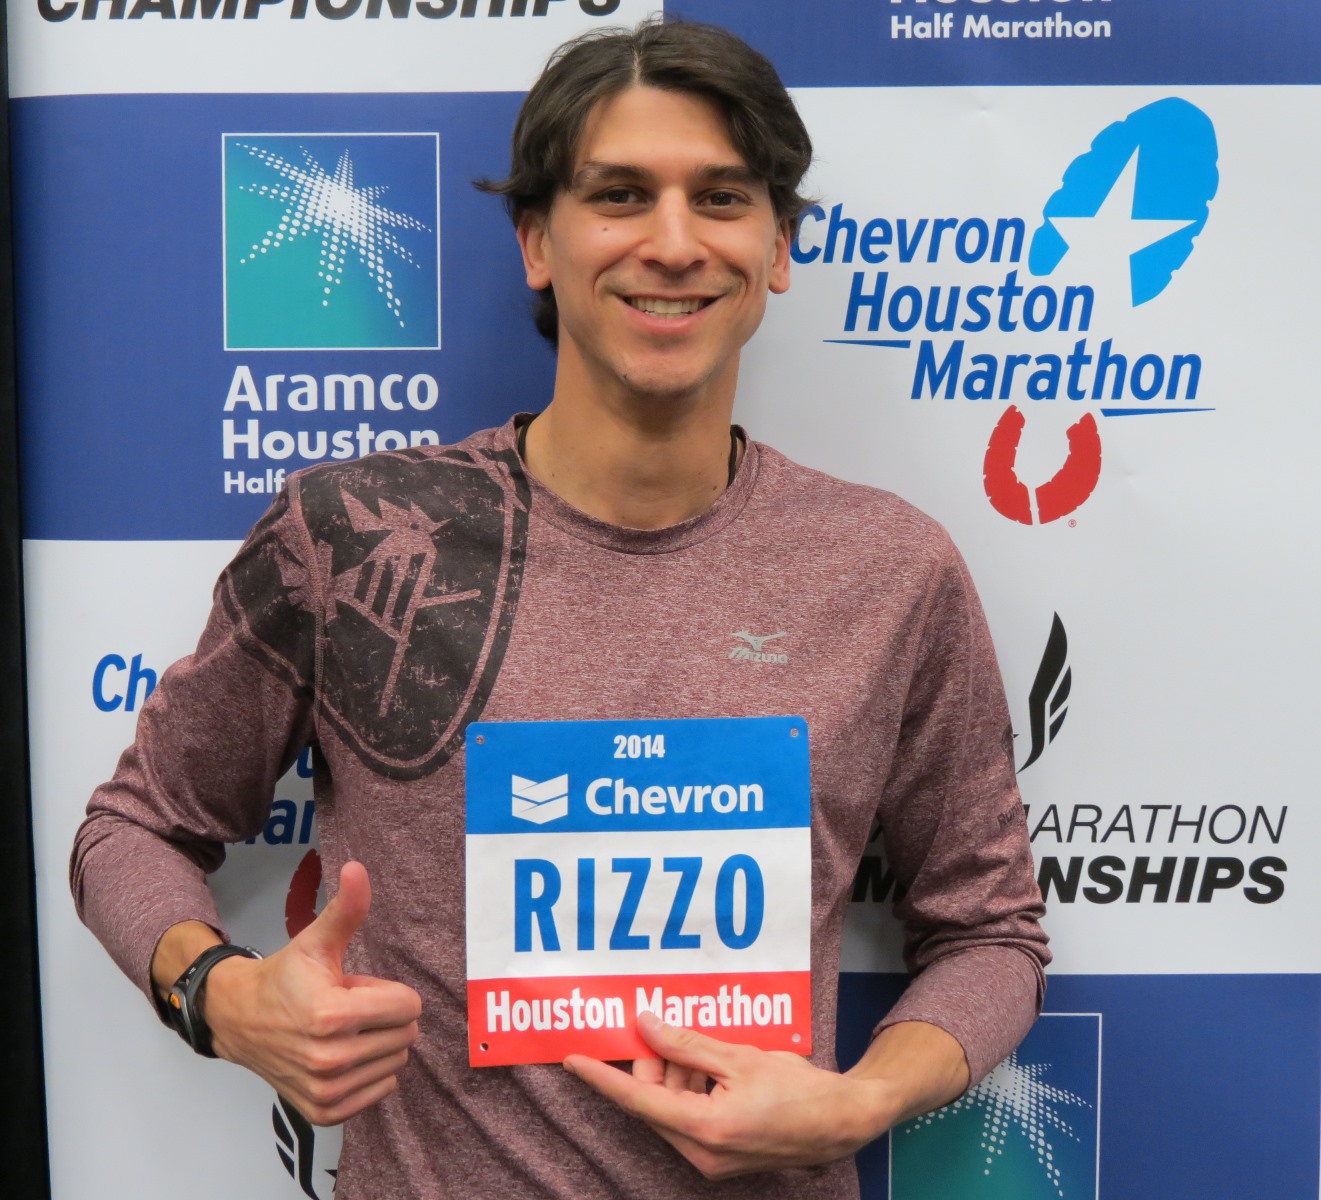 PHOTO: Patrick Rizzo before the 2014 Chevron Houston Marathon (photo by David Monti for Race Results Weekly)